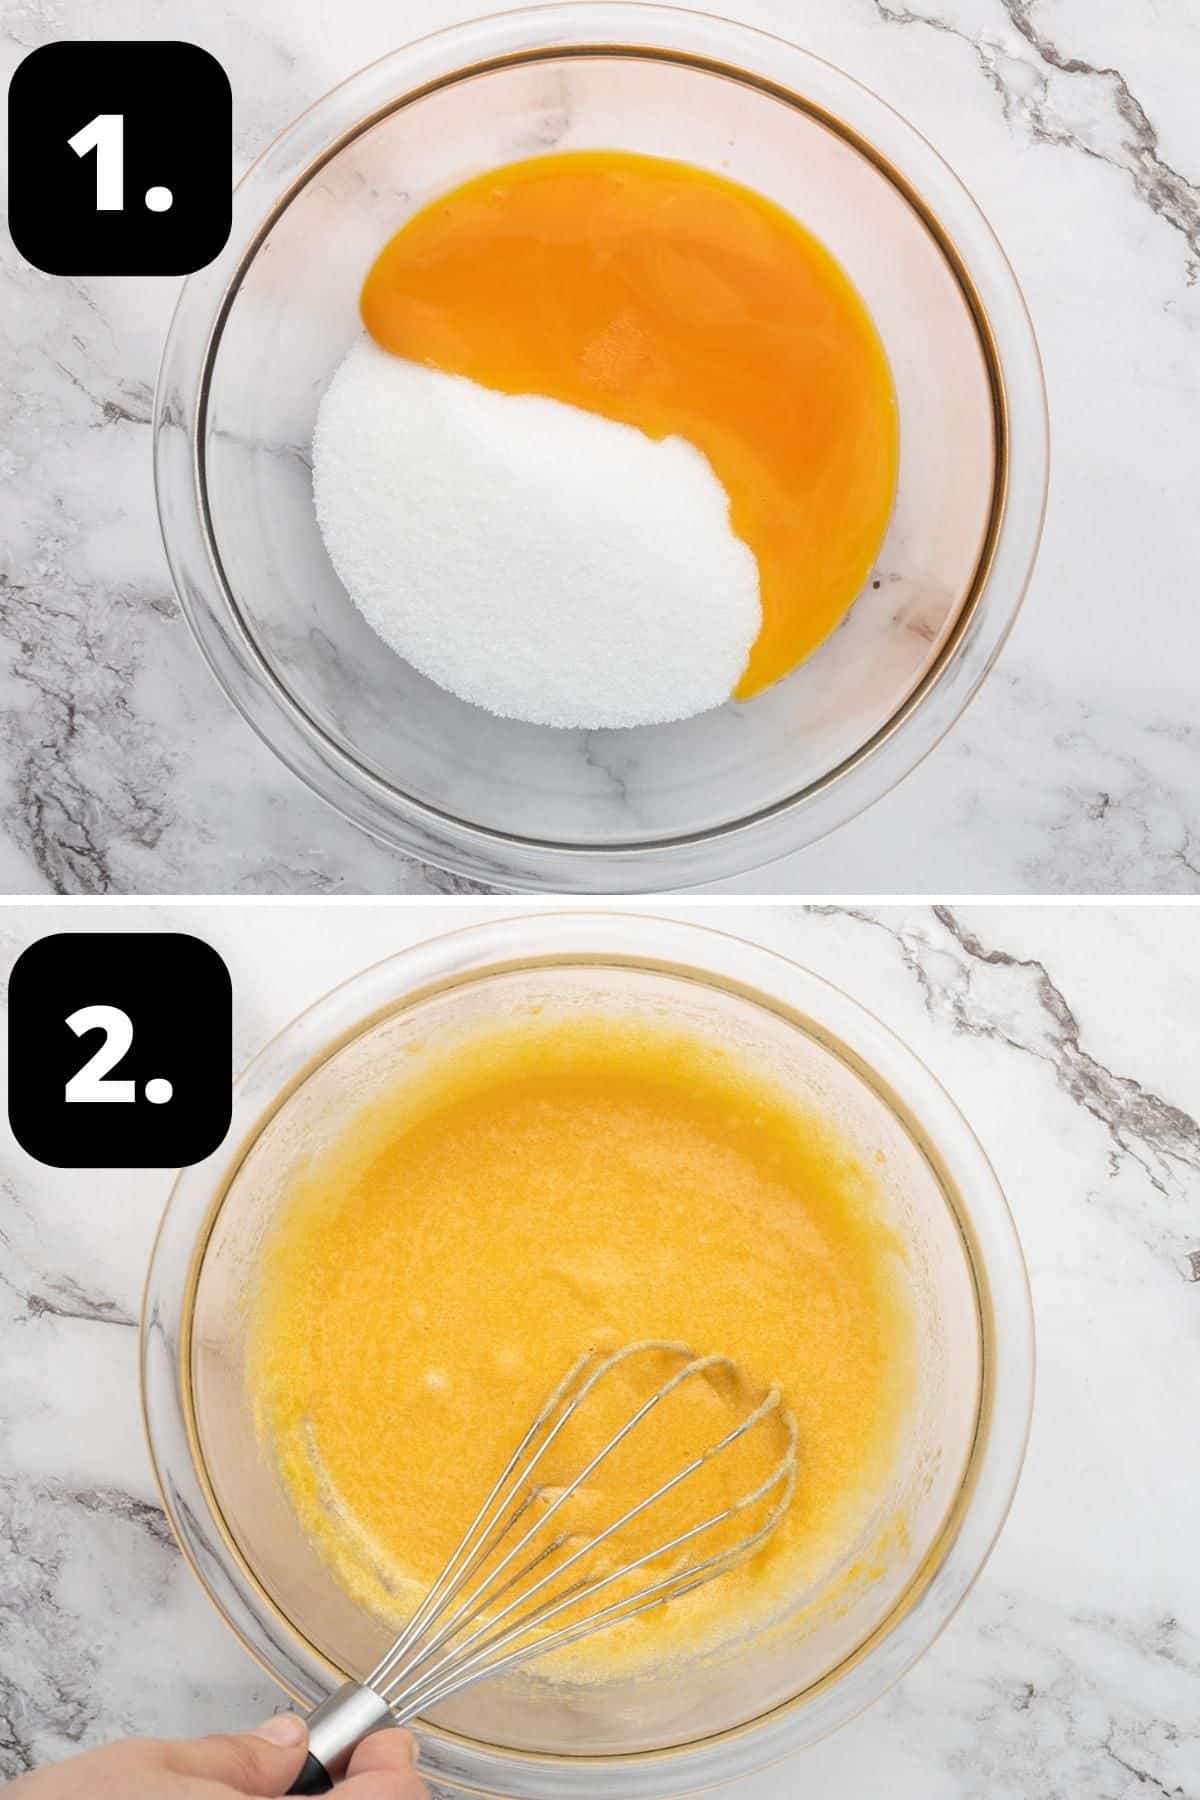 Step 1-2 of preparing this recipe - the egg yolks and sugar in glass bowl and the mixture being whisked.